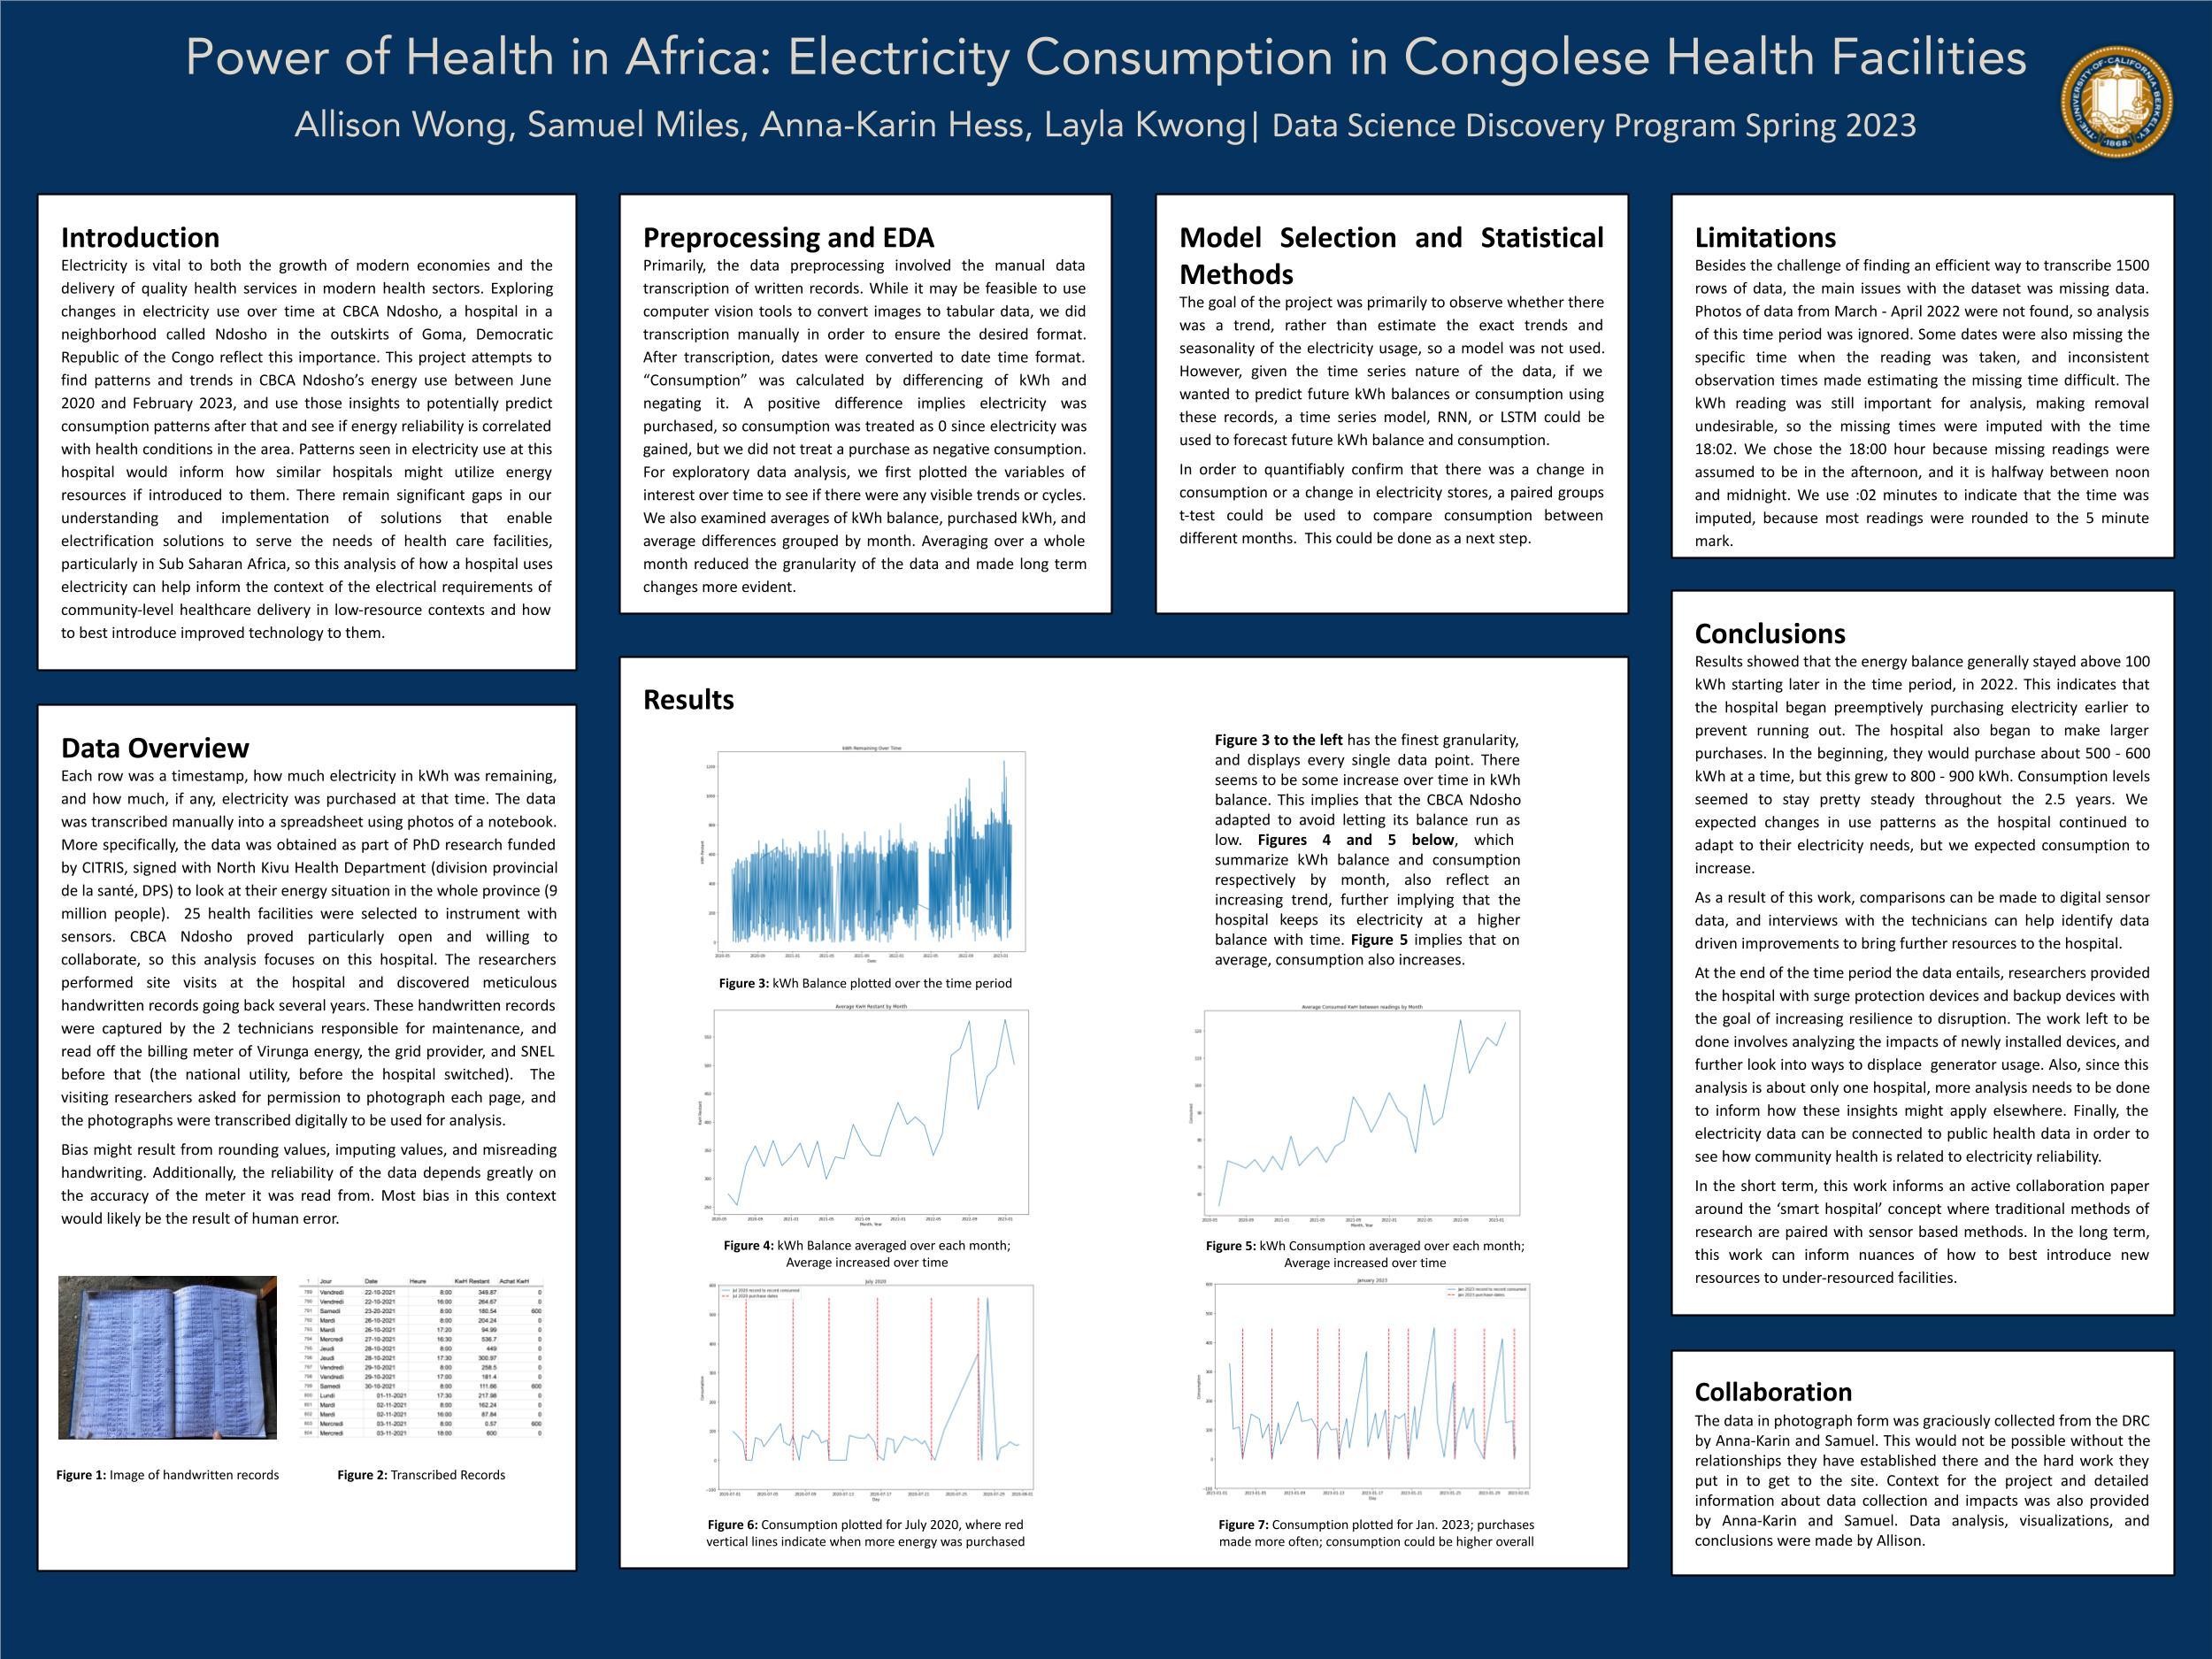 Power of Health in Africa: Electricity Consumption in Congolese Health Facilities - Spring 2023 Discovery Project